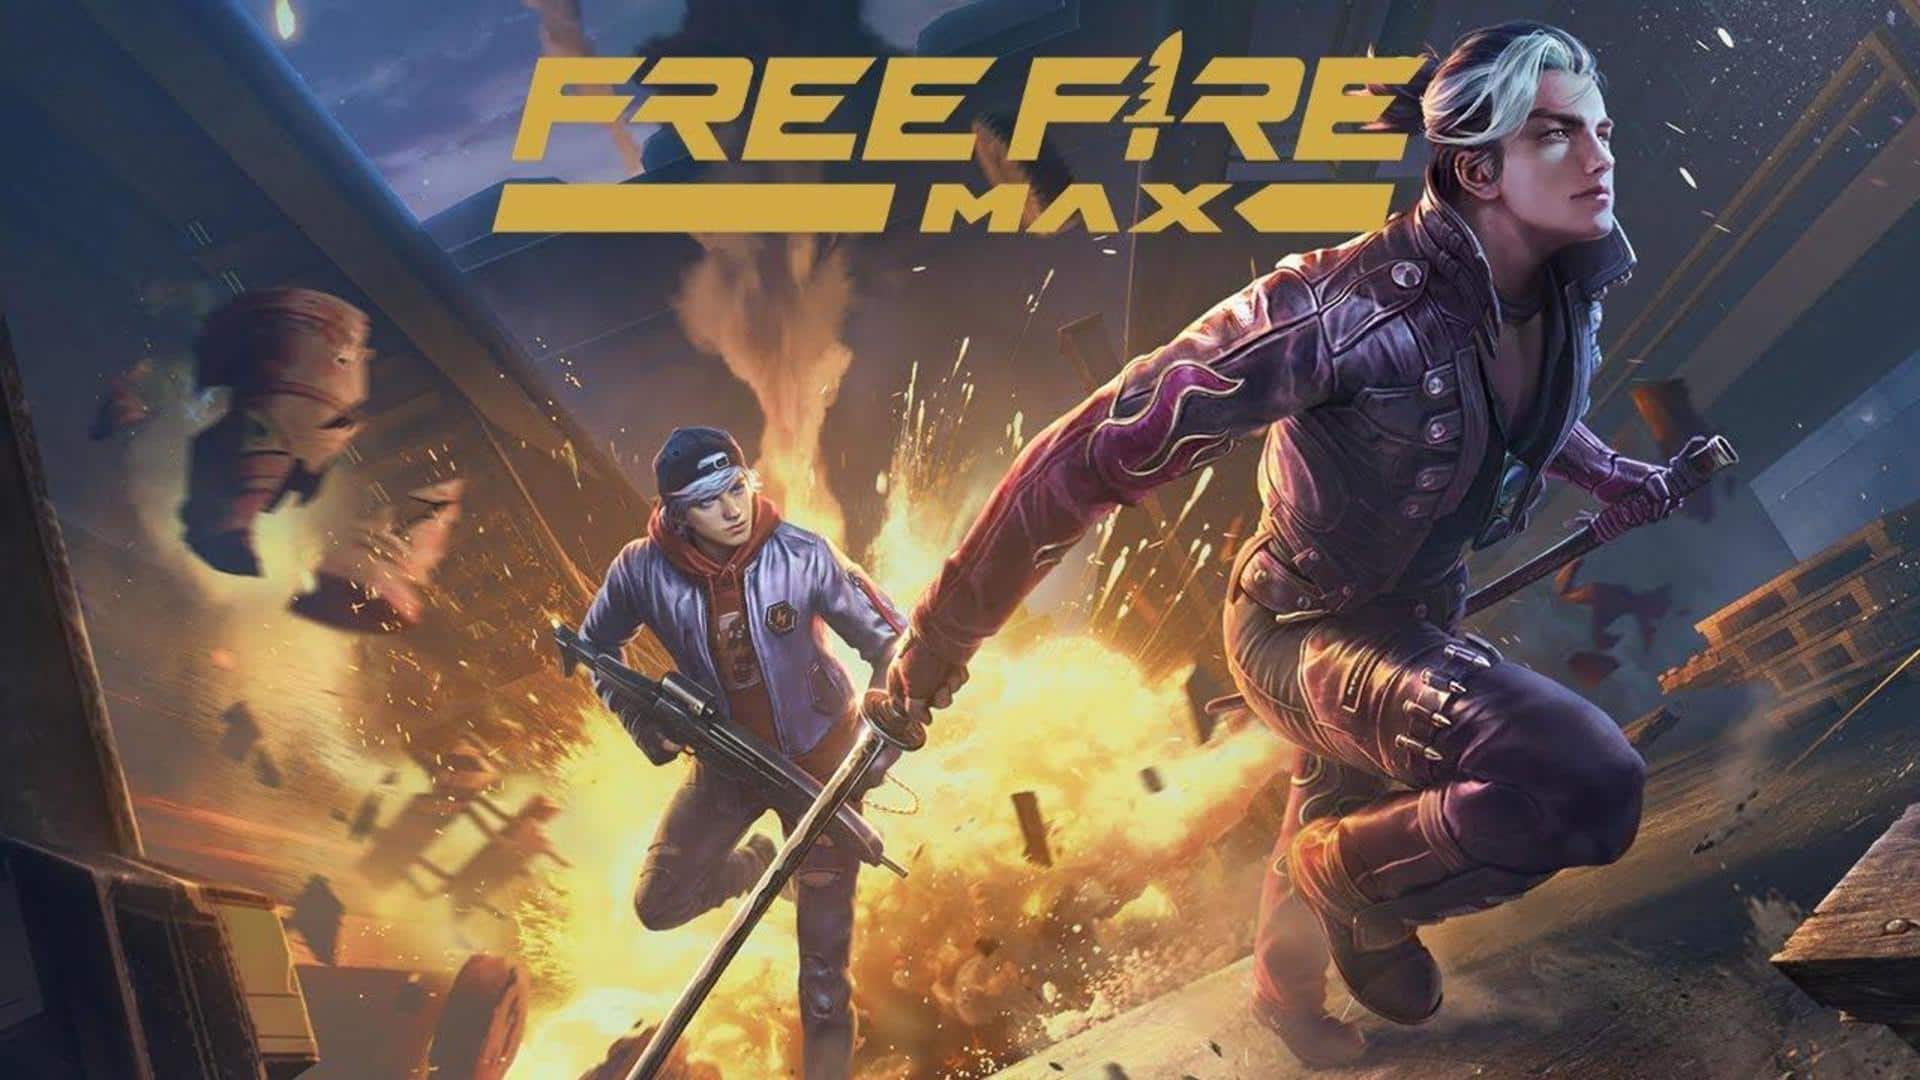 Garena Free Fire MAX's June 26 codes: How to redeem